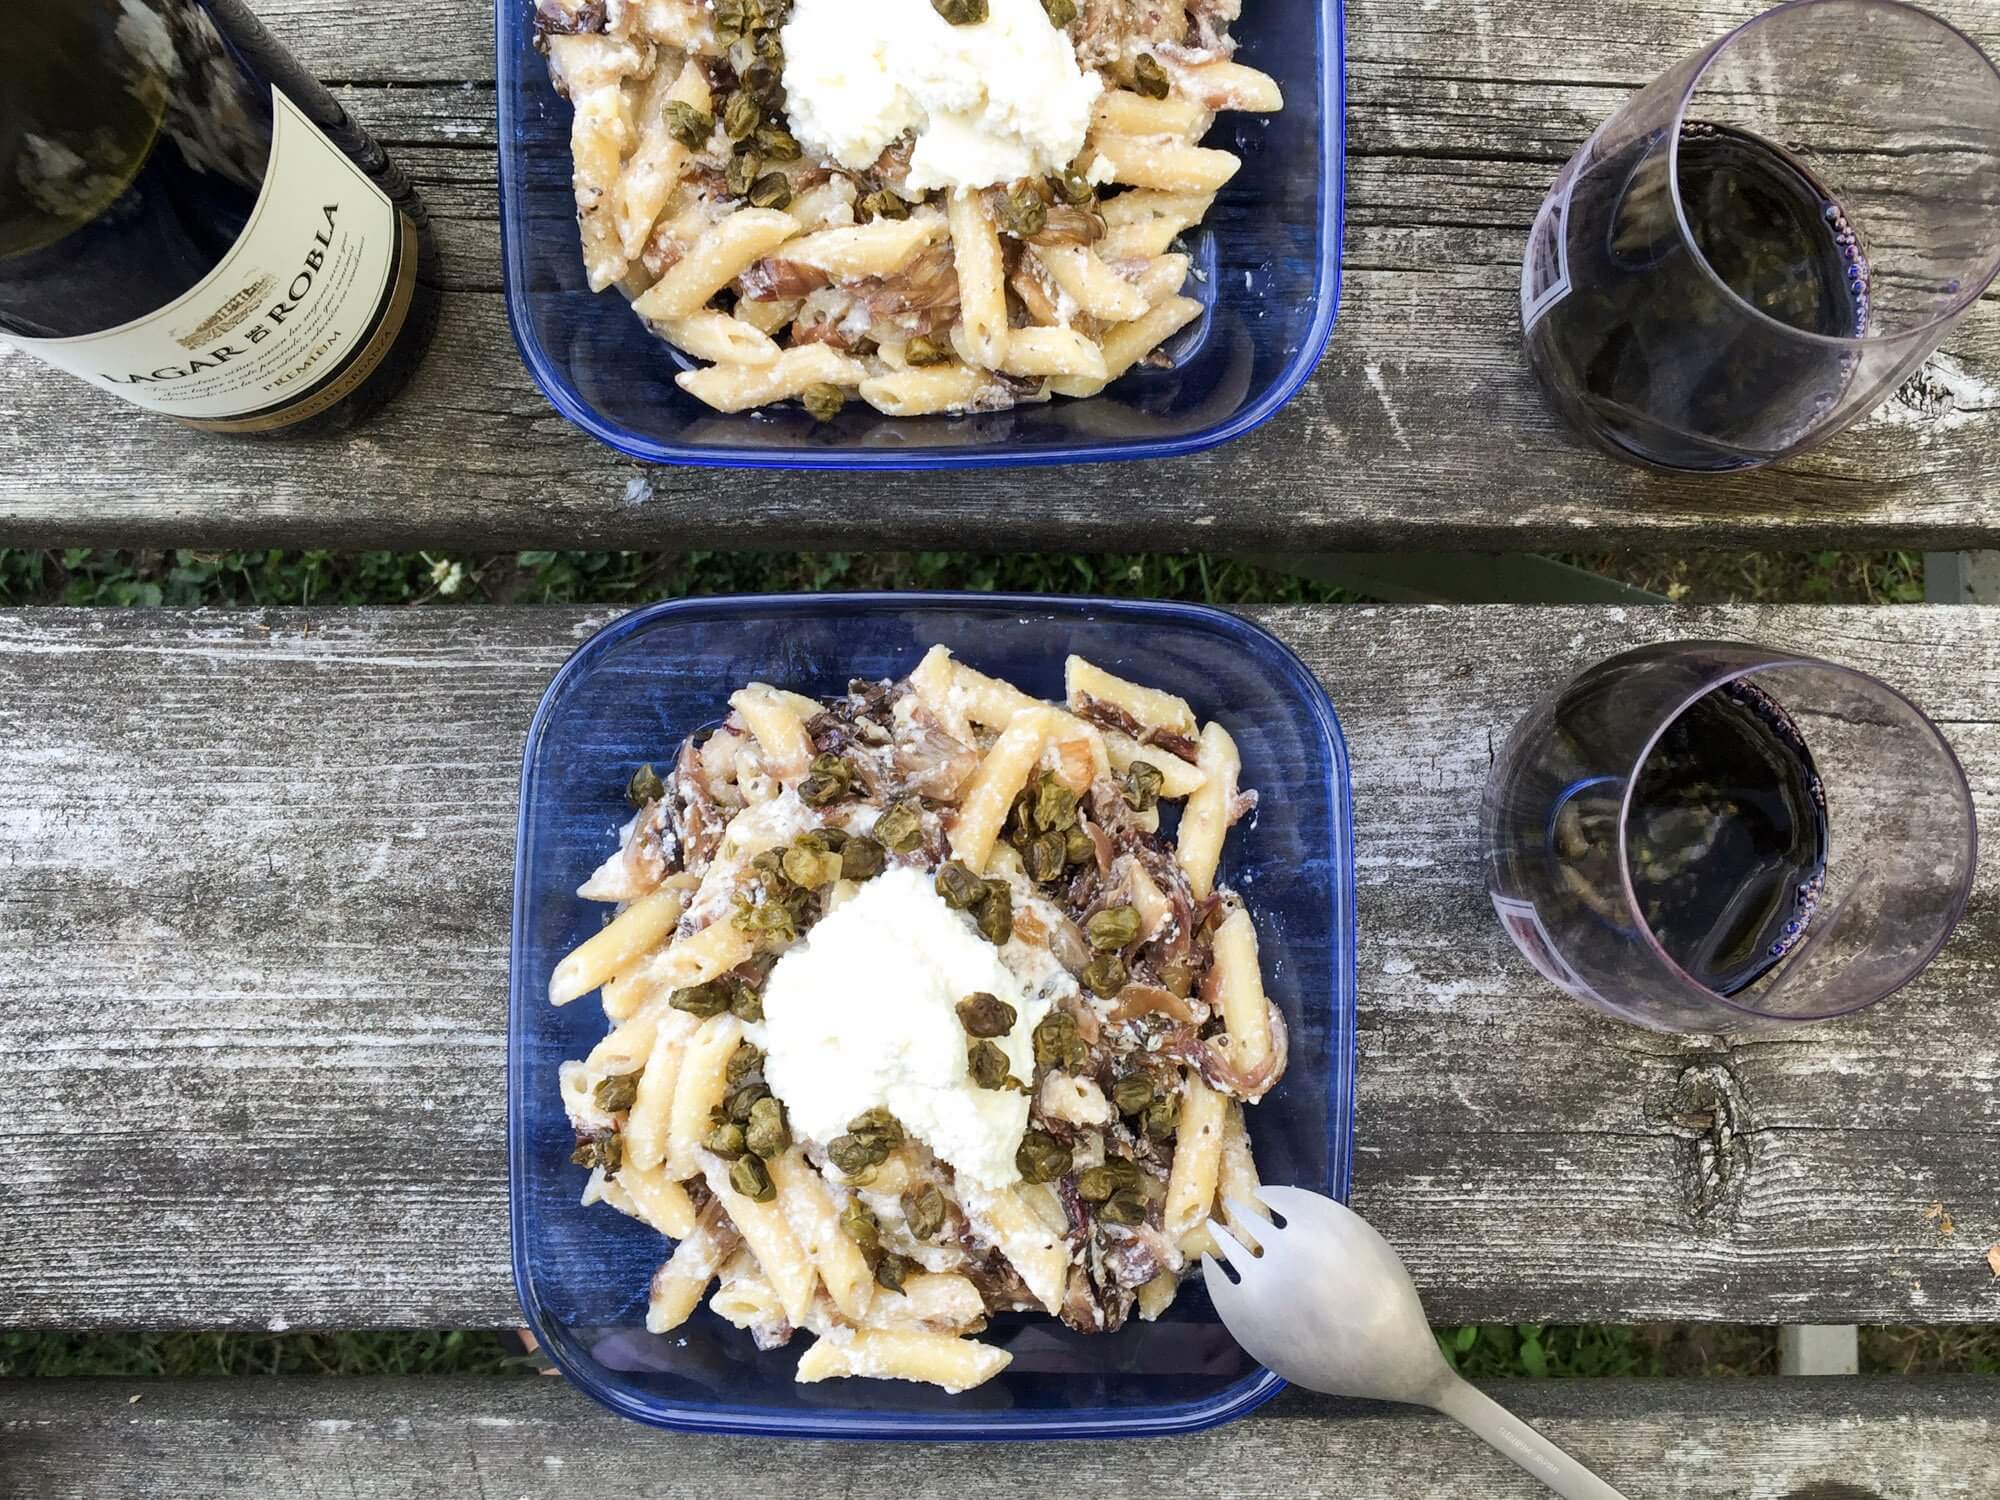 Penne with ricotta, caramelized onion, radicchio and capers